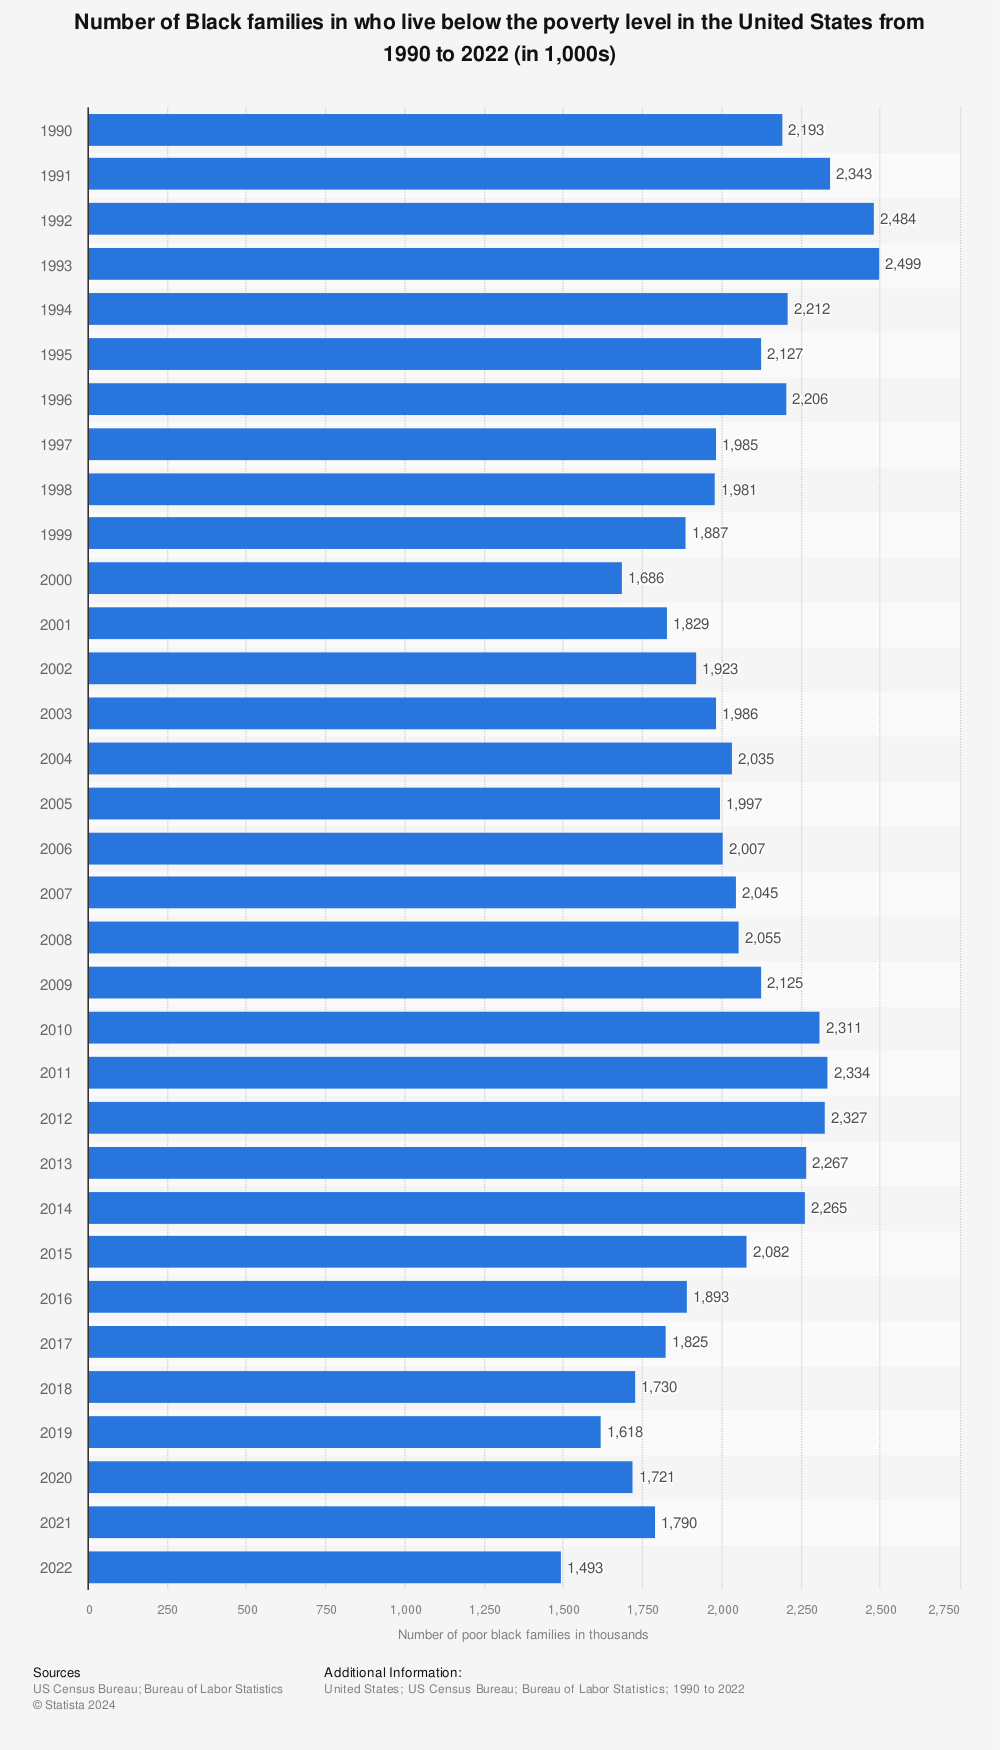 Statistic: Number of black families in the U.S. who live below the poverty level from 1990 to 2021 (in 1,000s) | Statista